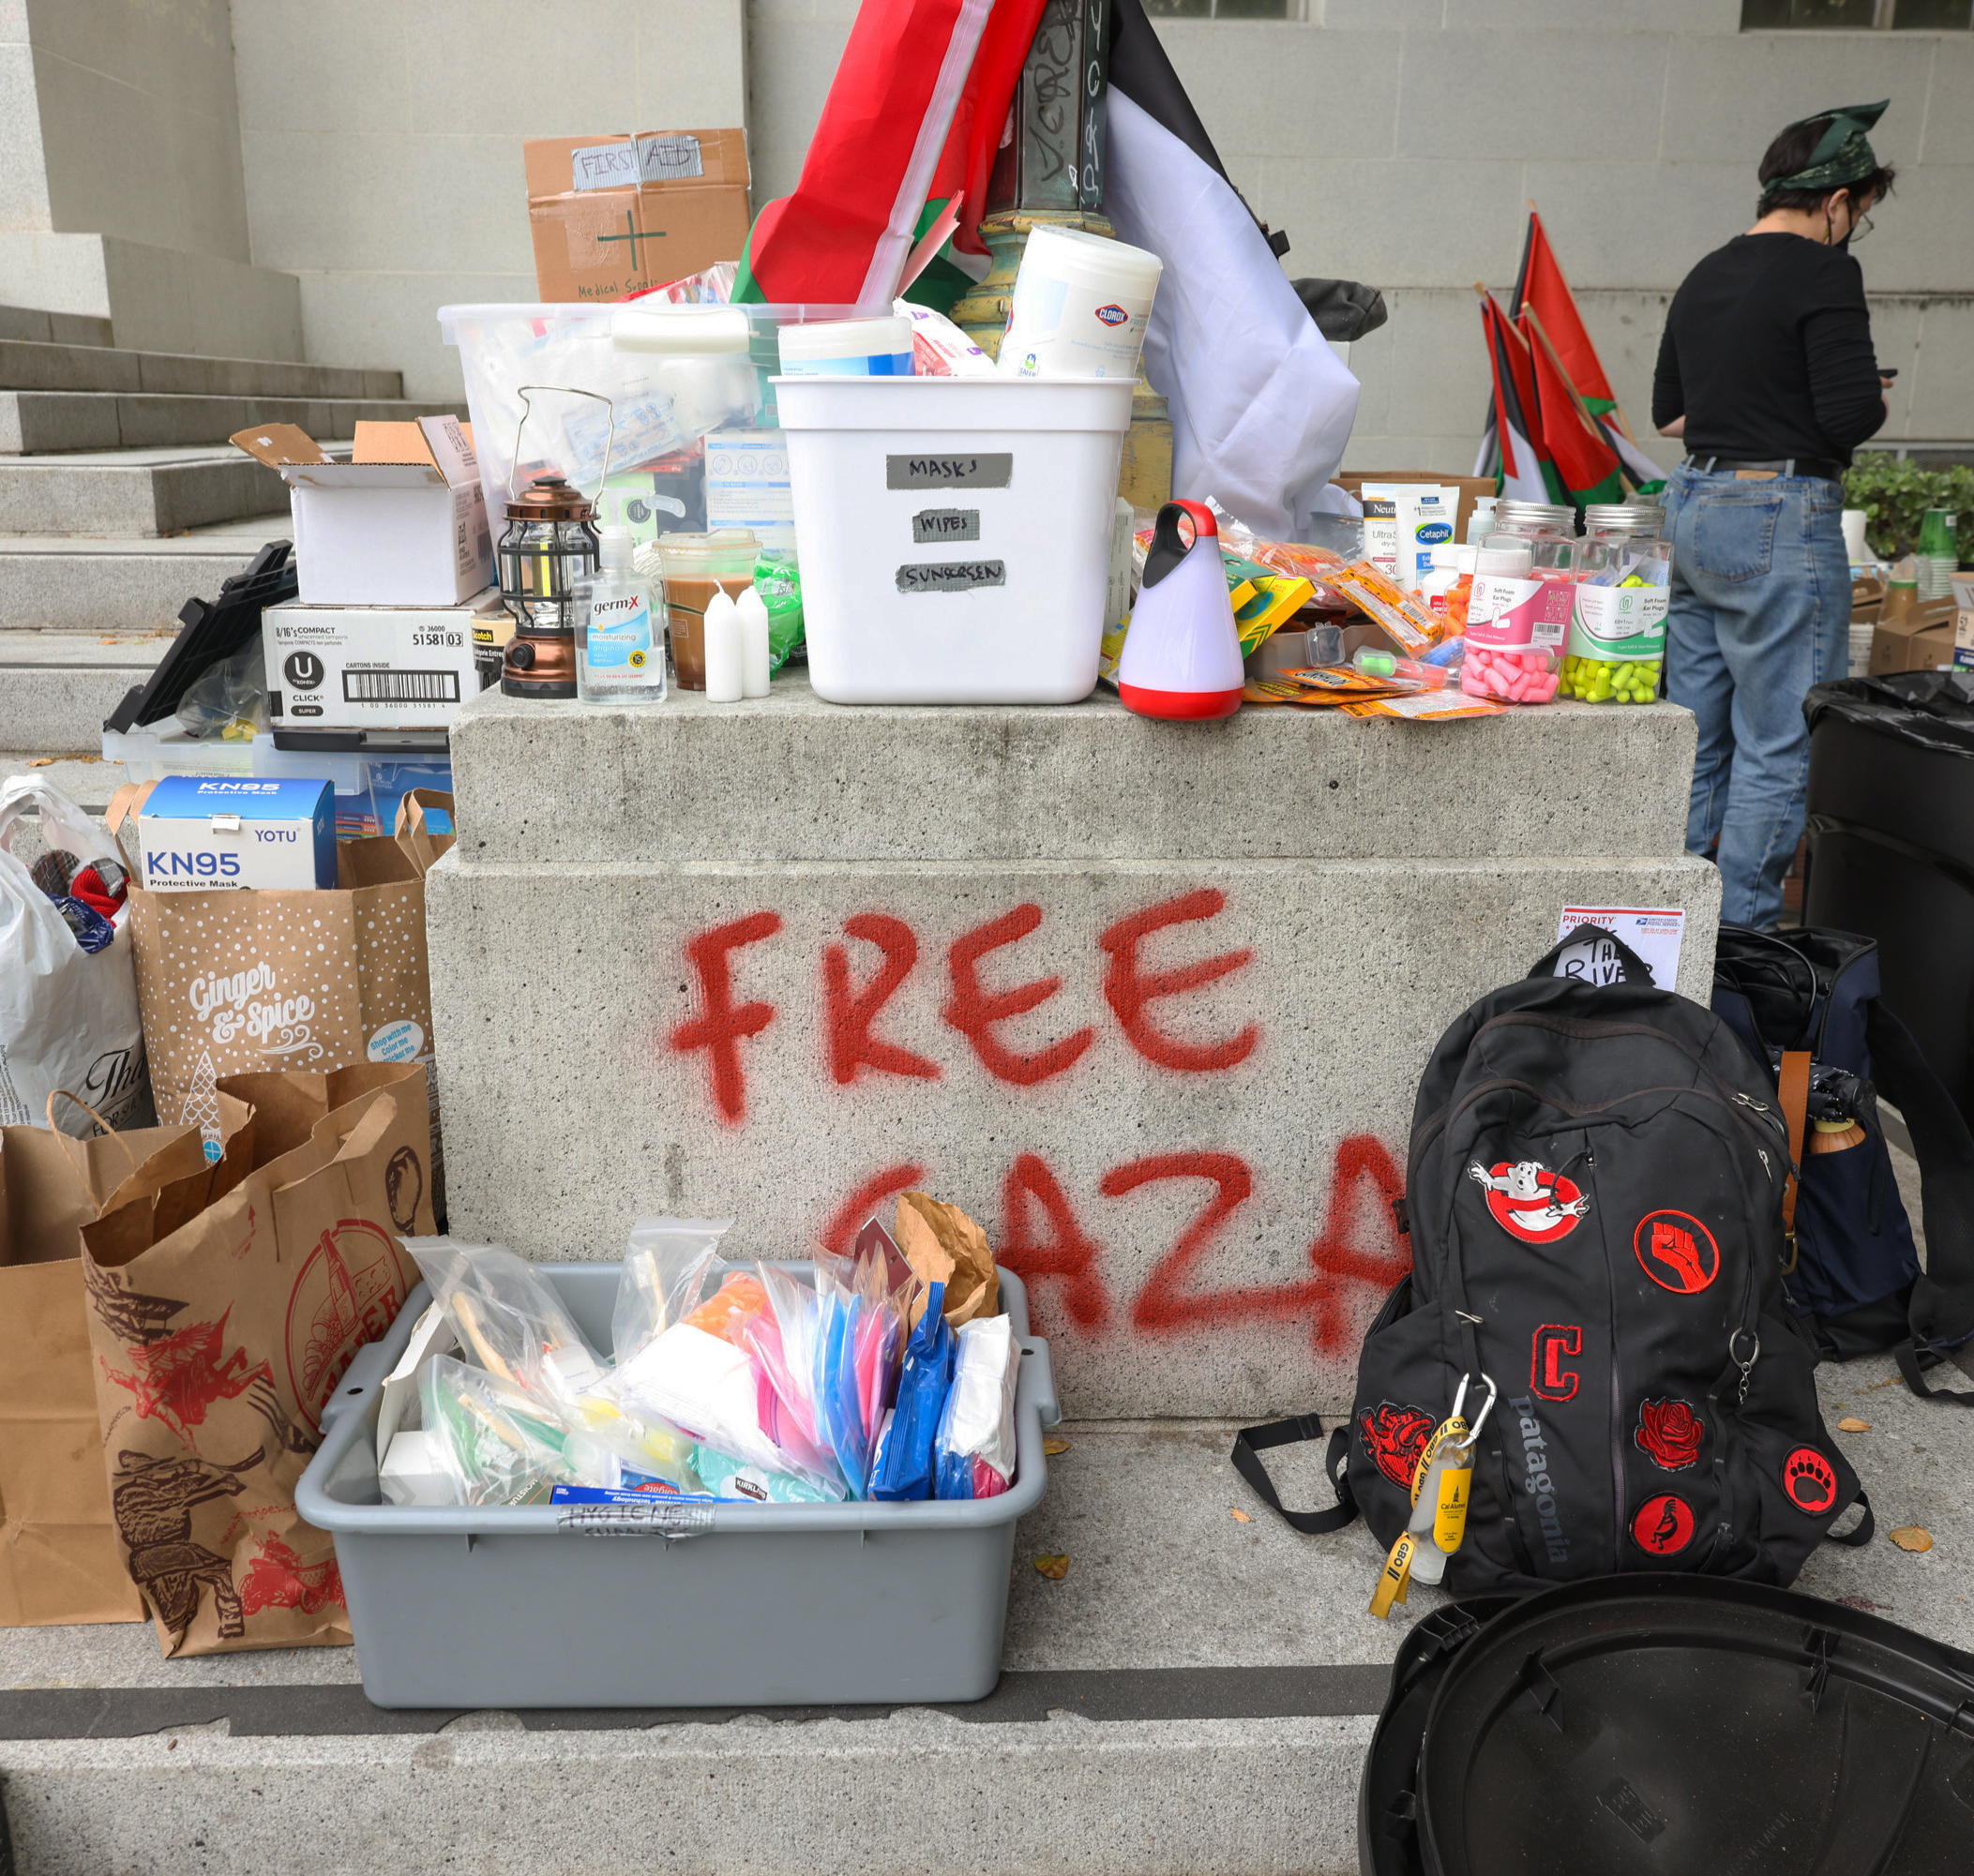 Supplies spread on steps beneath &quot;FREE GAZA&quot; graffiti; a person stands to the side.